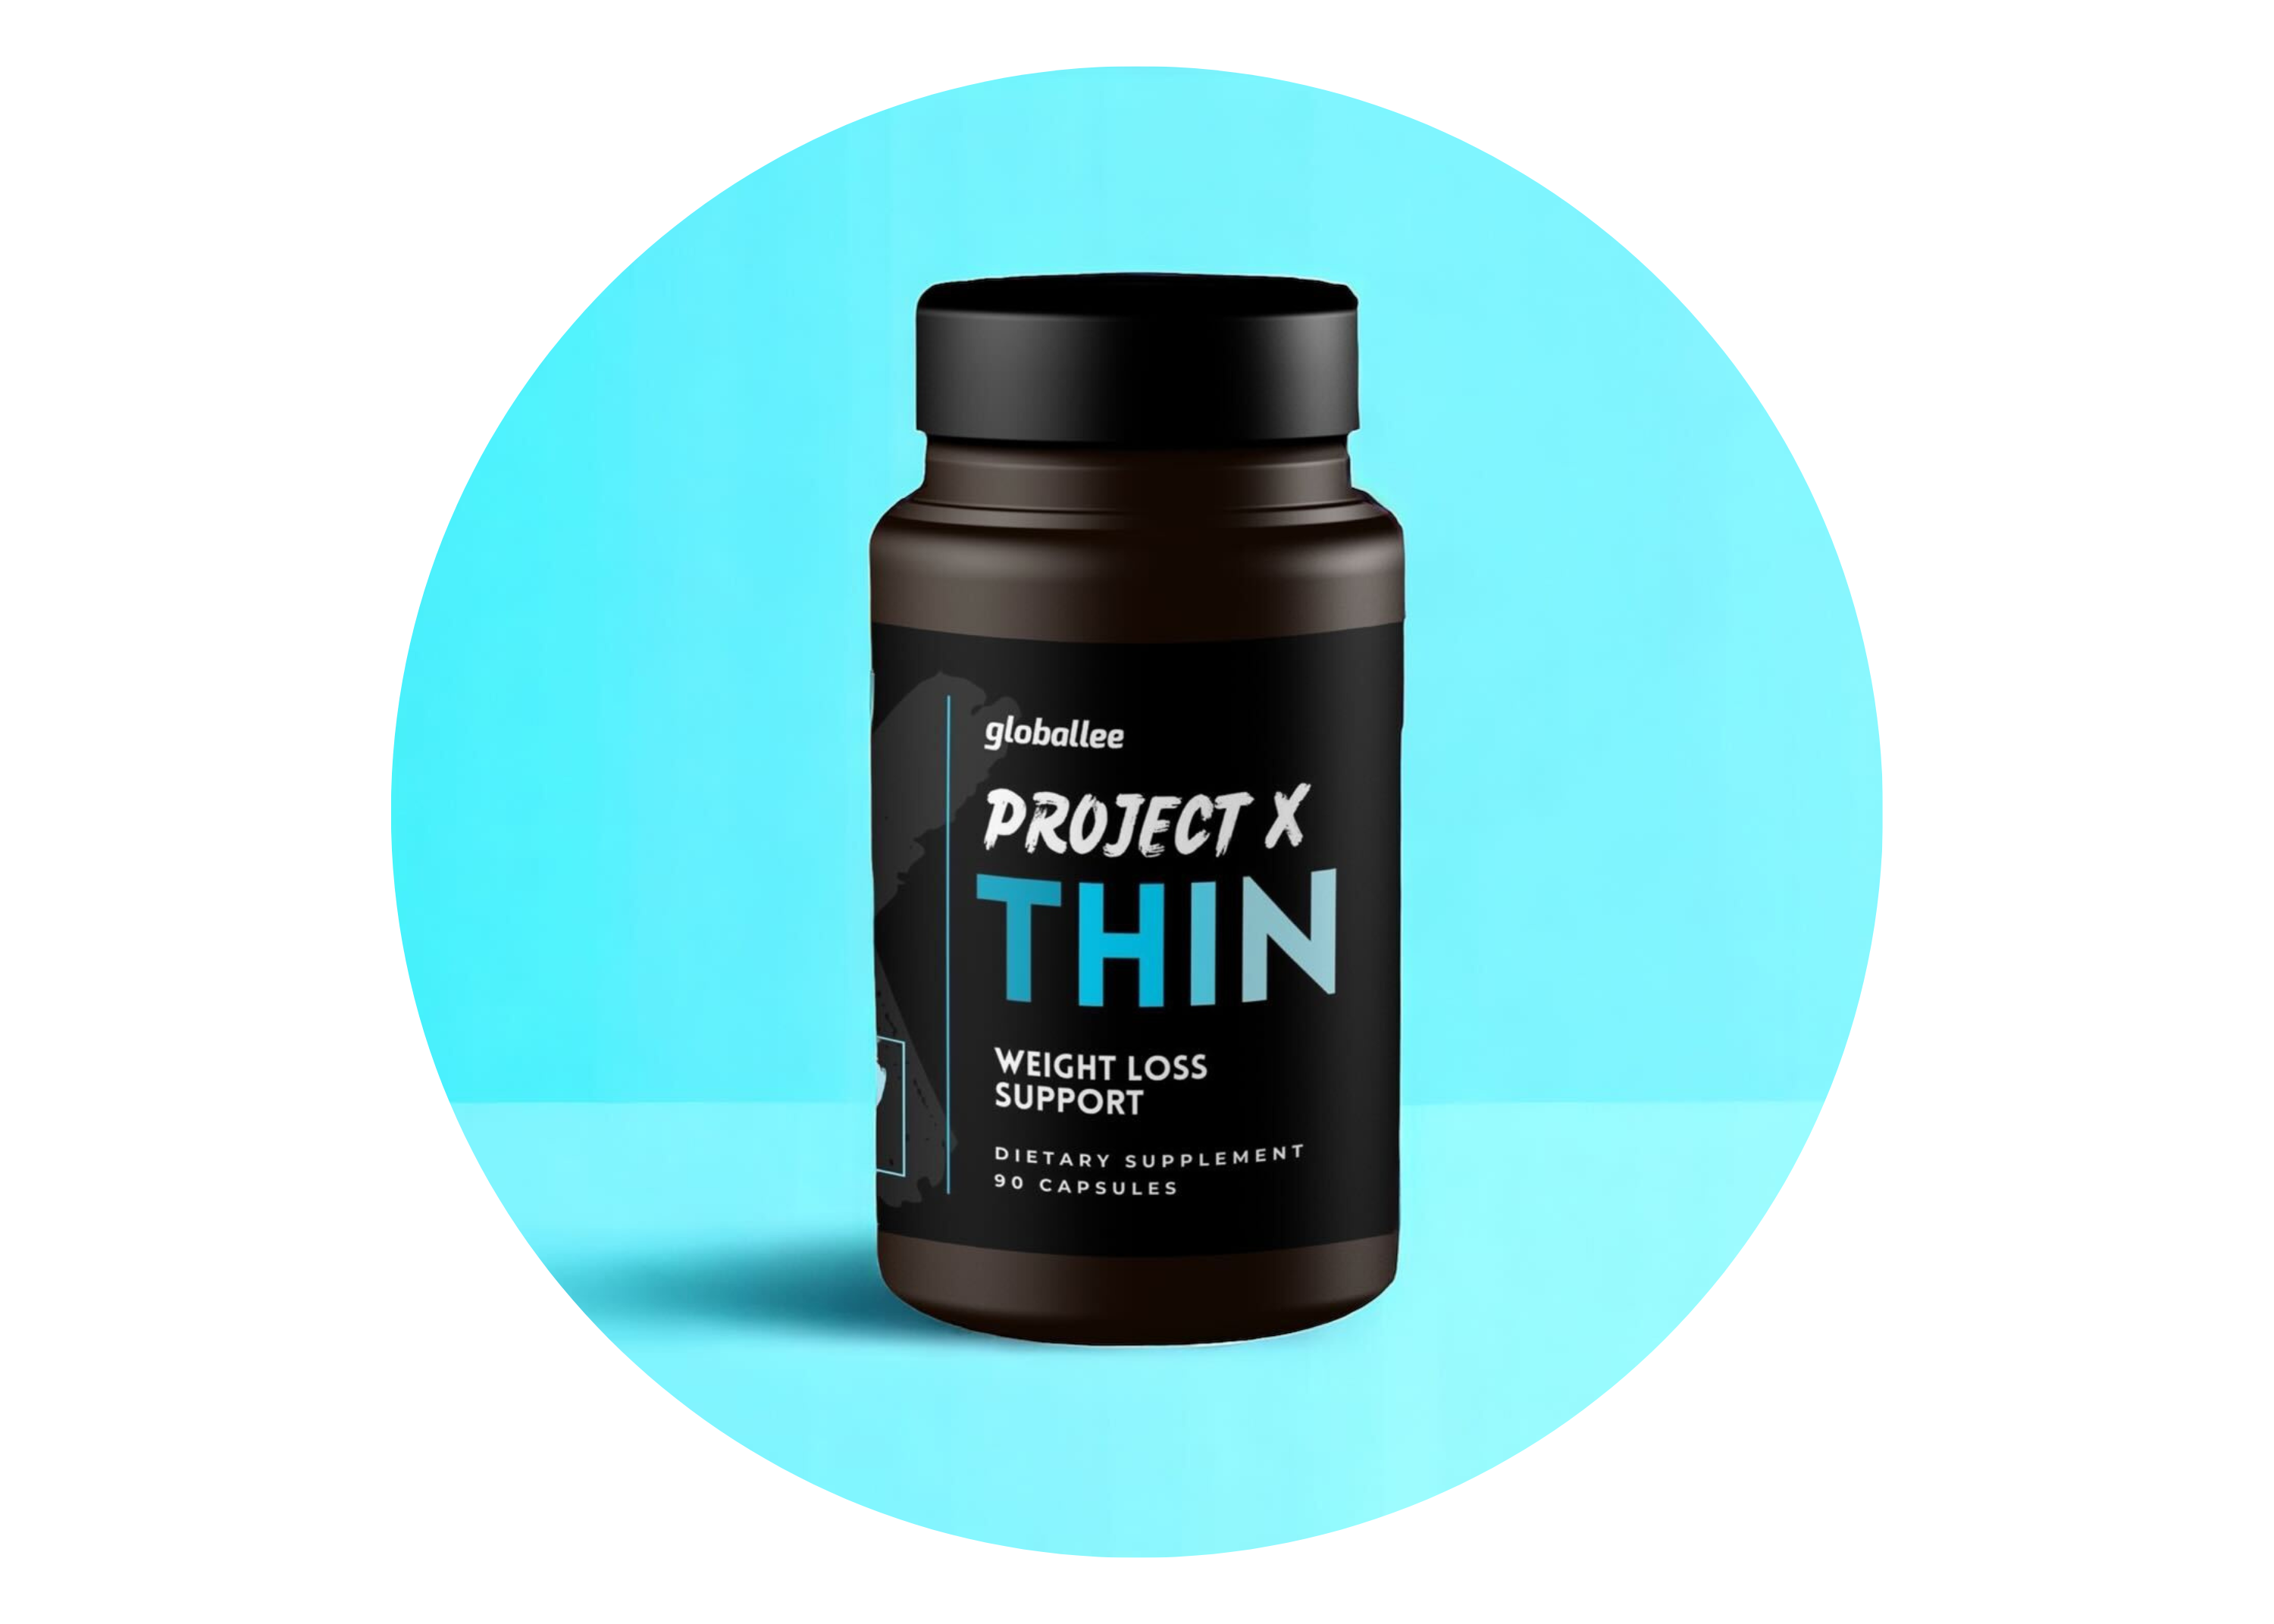 Project-X-Thin Shop All